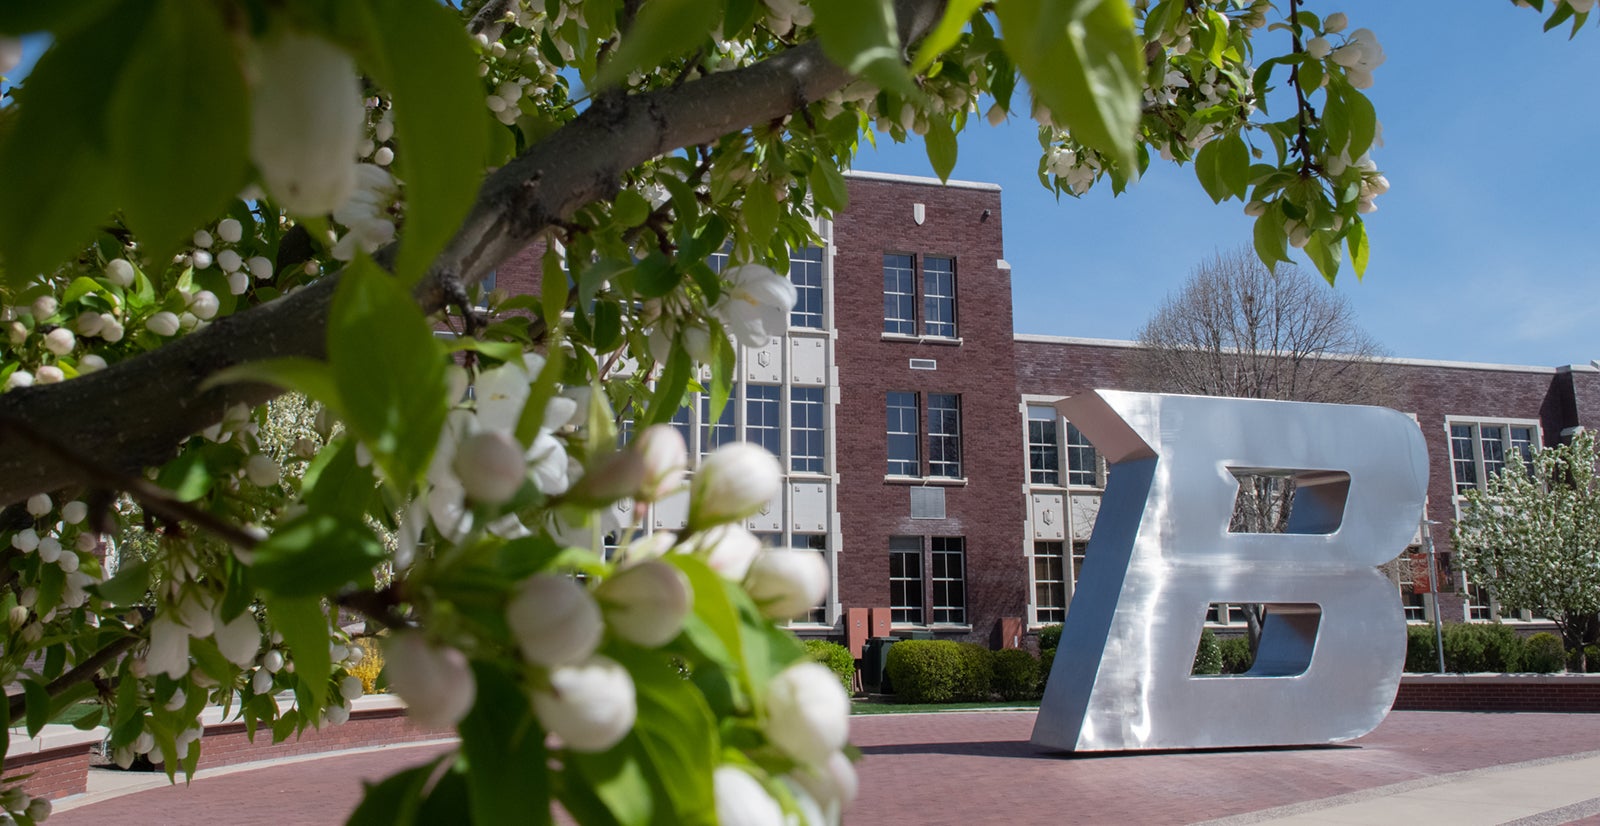 The boise state B statue through spring blooms